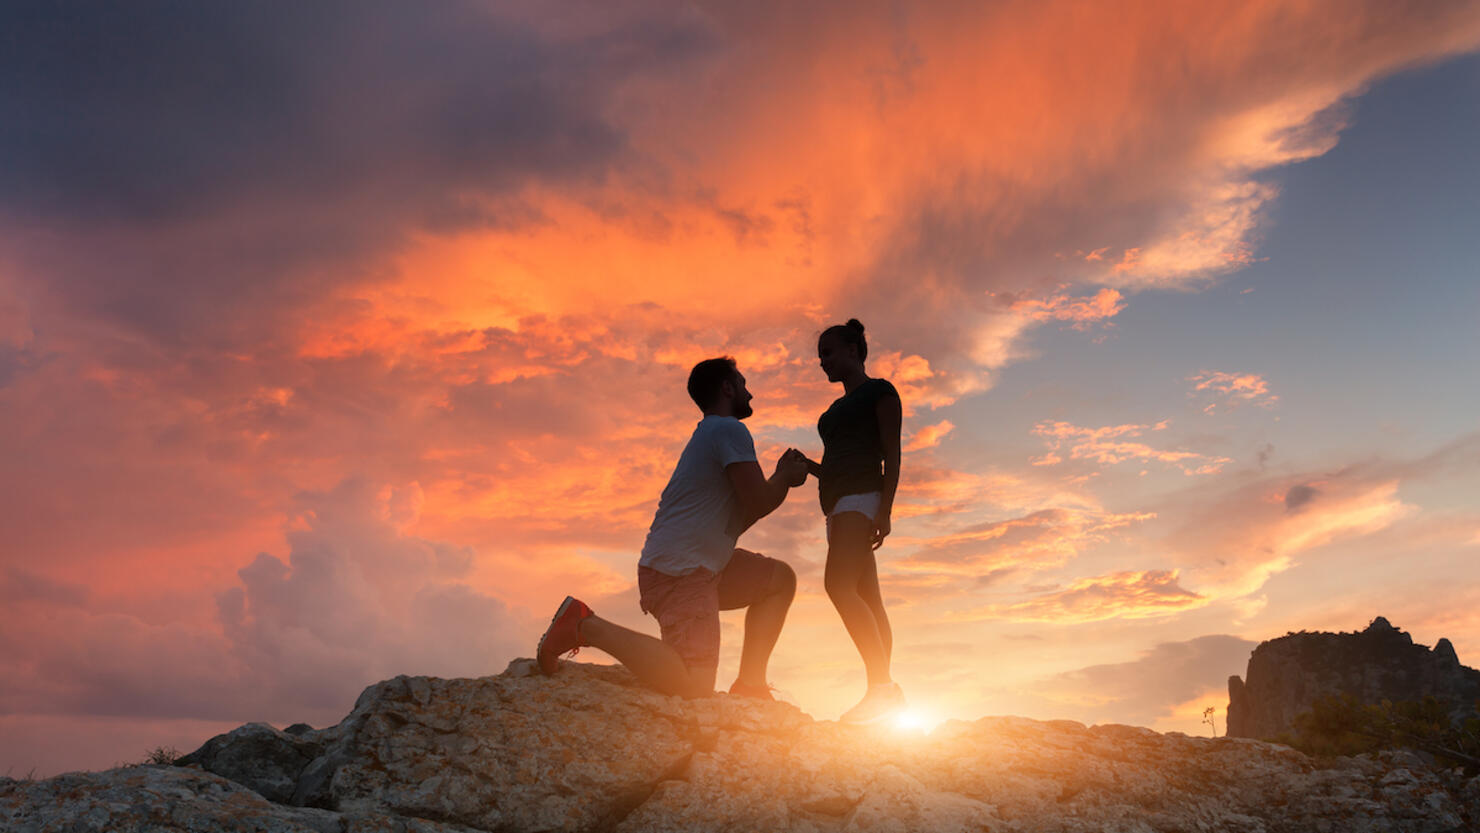 Silhouettes of a man making marriage proposal to his girlfriend on the mountain peak at sunset. Landscape with silhouette of lovers against colorful sky. Couple. People, relationship. Traveling couple